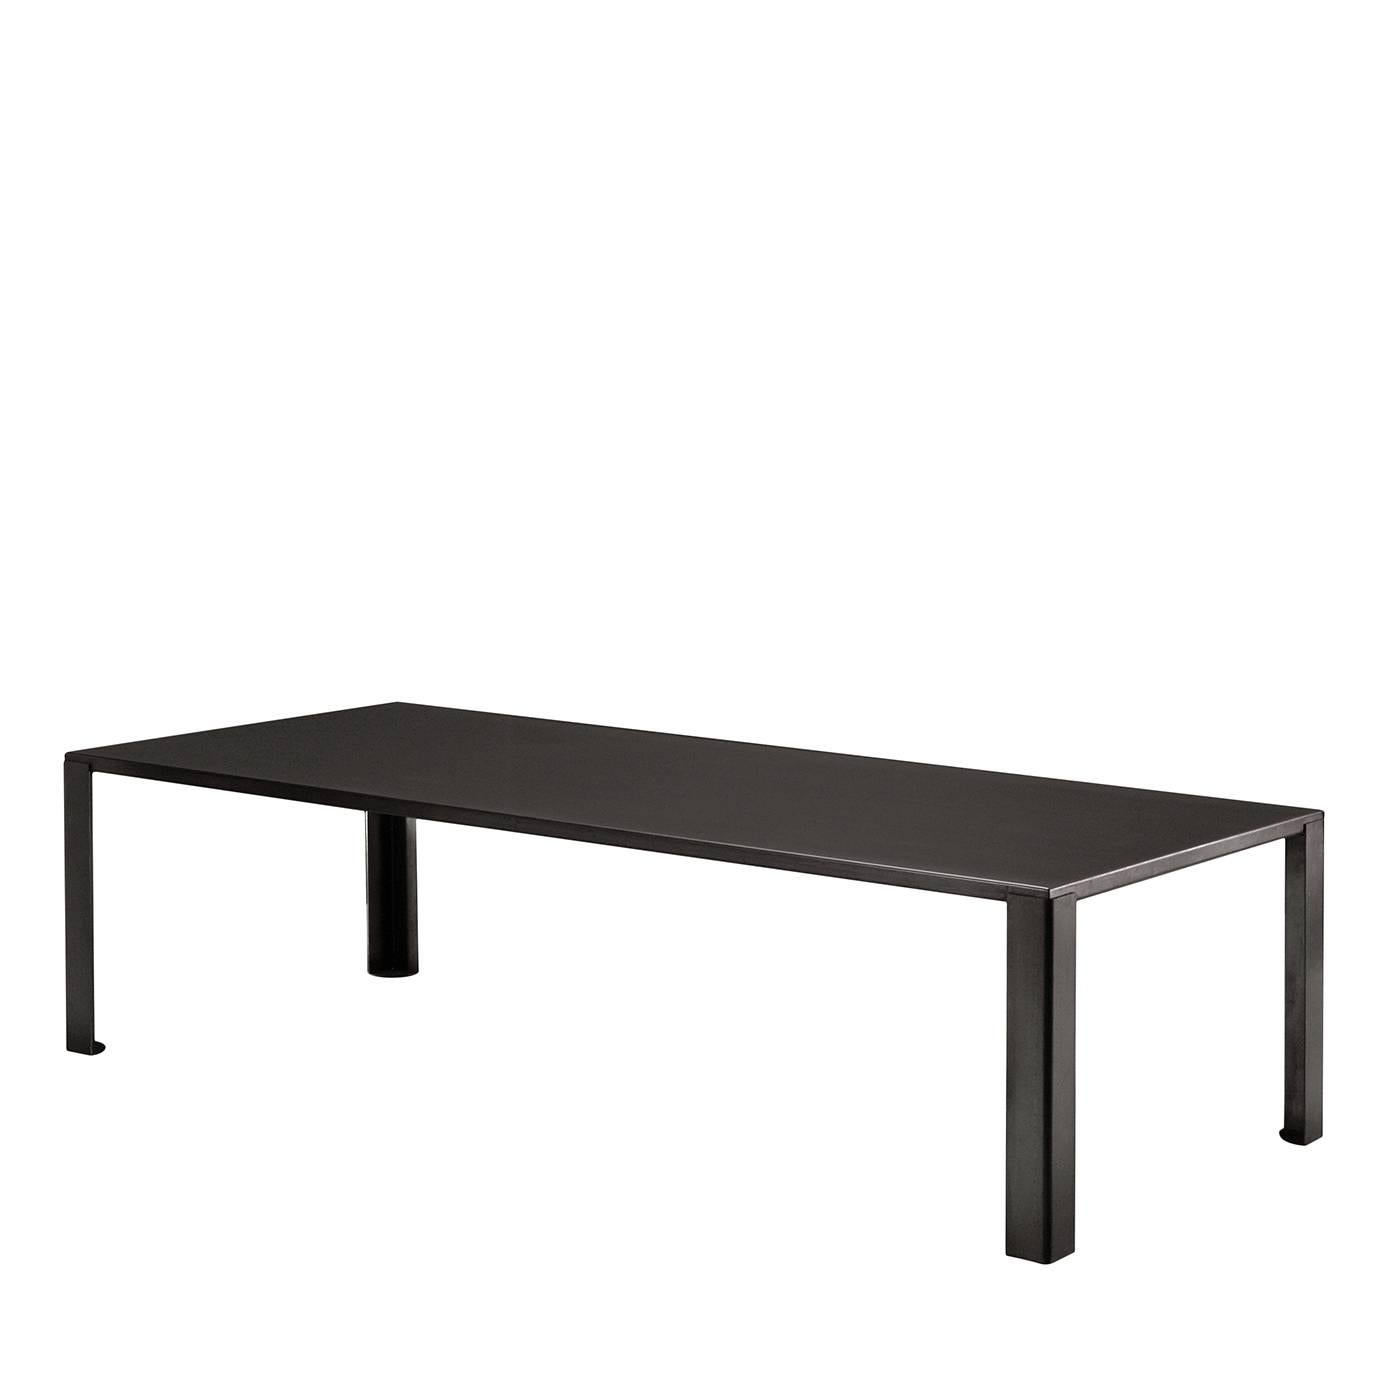 Big Irony Table For Sale